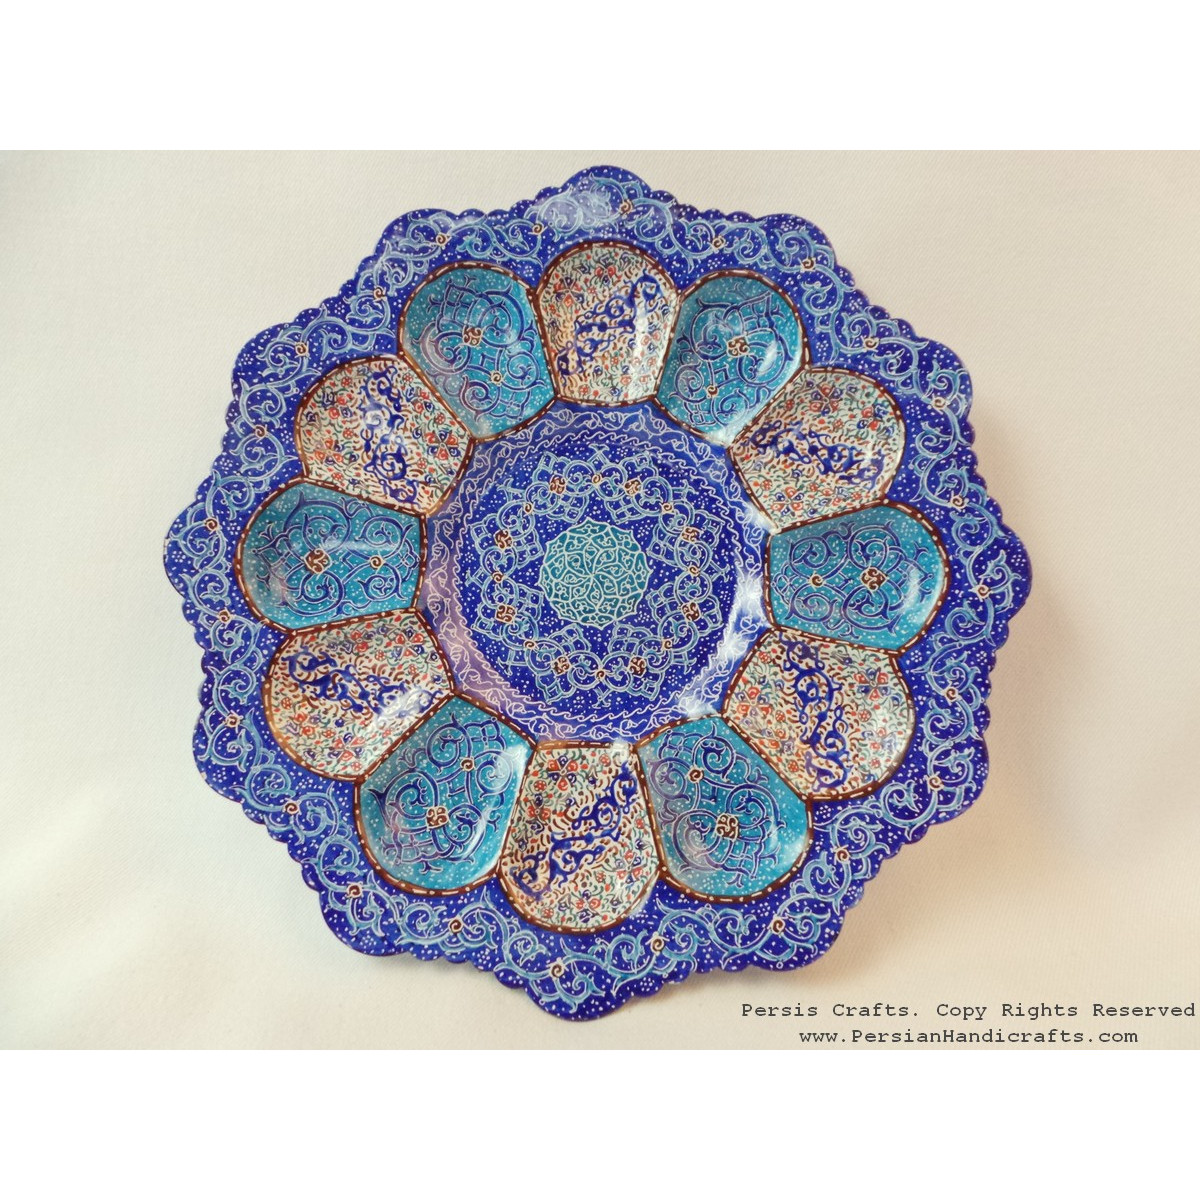 Enamel on Copper Candy/Nuts Bowl & Plate - HE3023-Persian Handicrafts